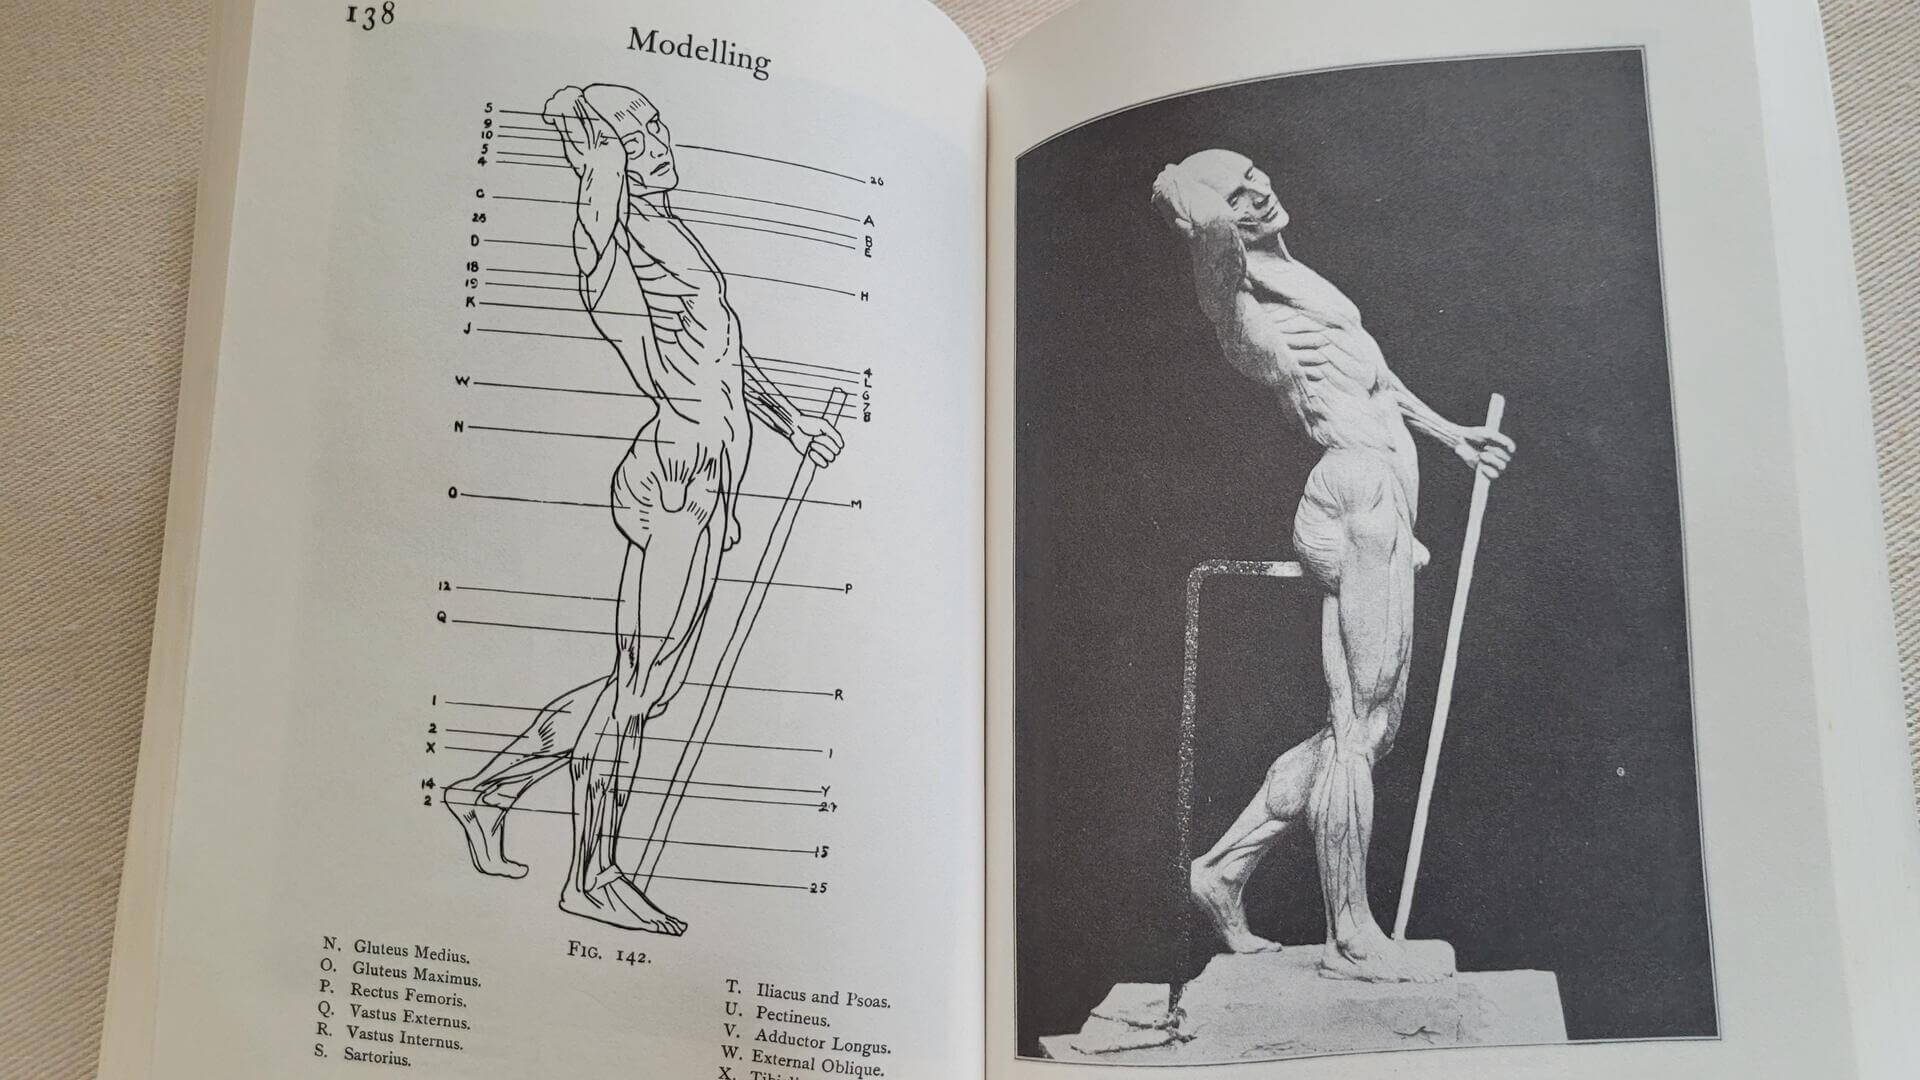 Modelling and Sculpting the Human Figurebook by Édouard Lantéri‎ Dover Publications; Revised edition 1985 ISBN-10: ‎ 0486250067 ISBN-13: ‎ 978-0486250069